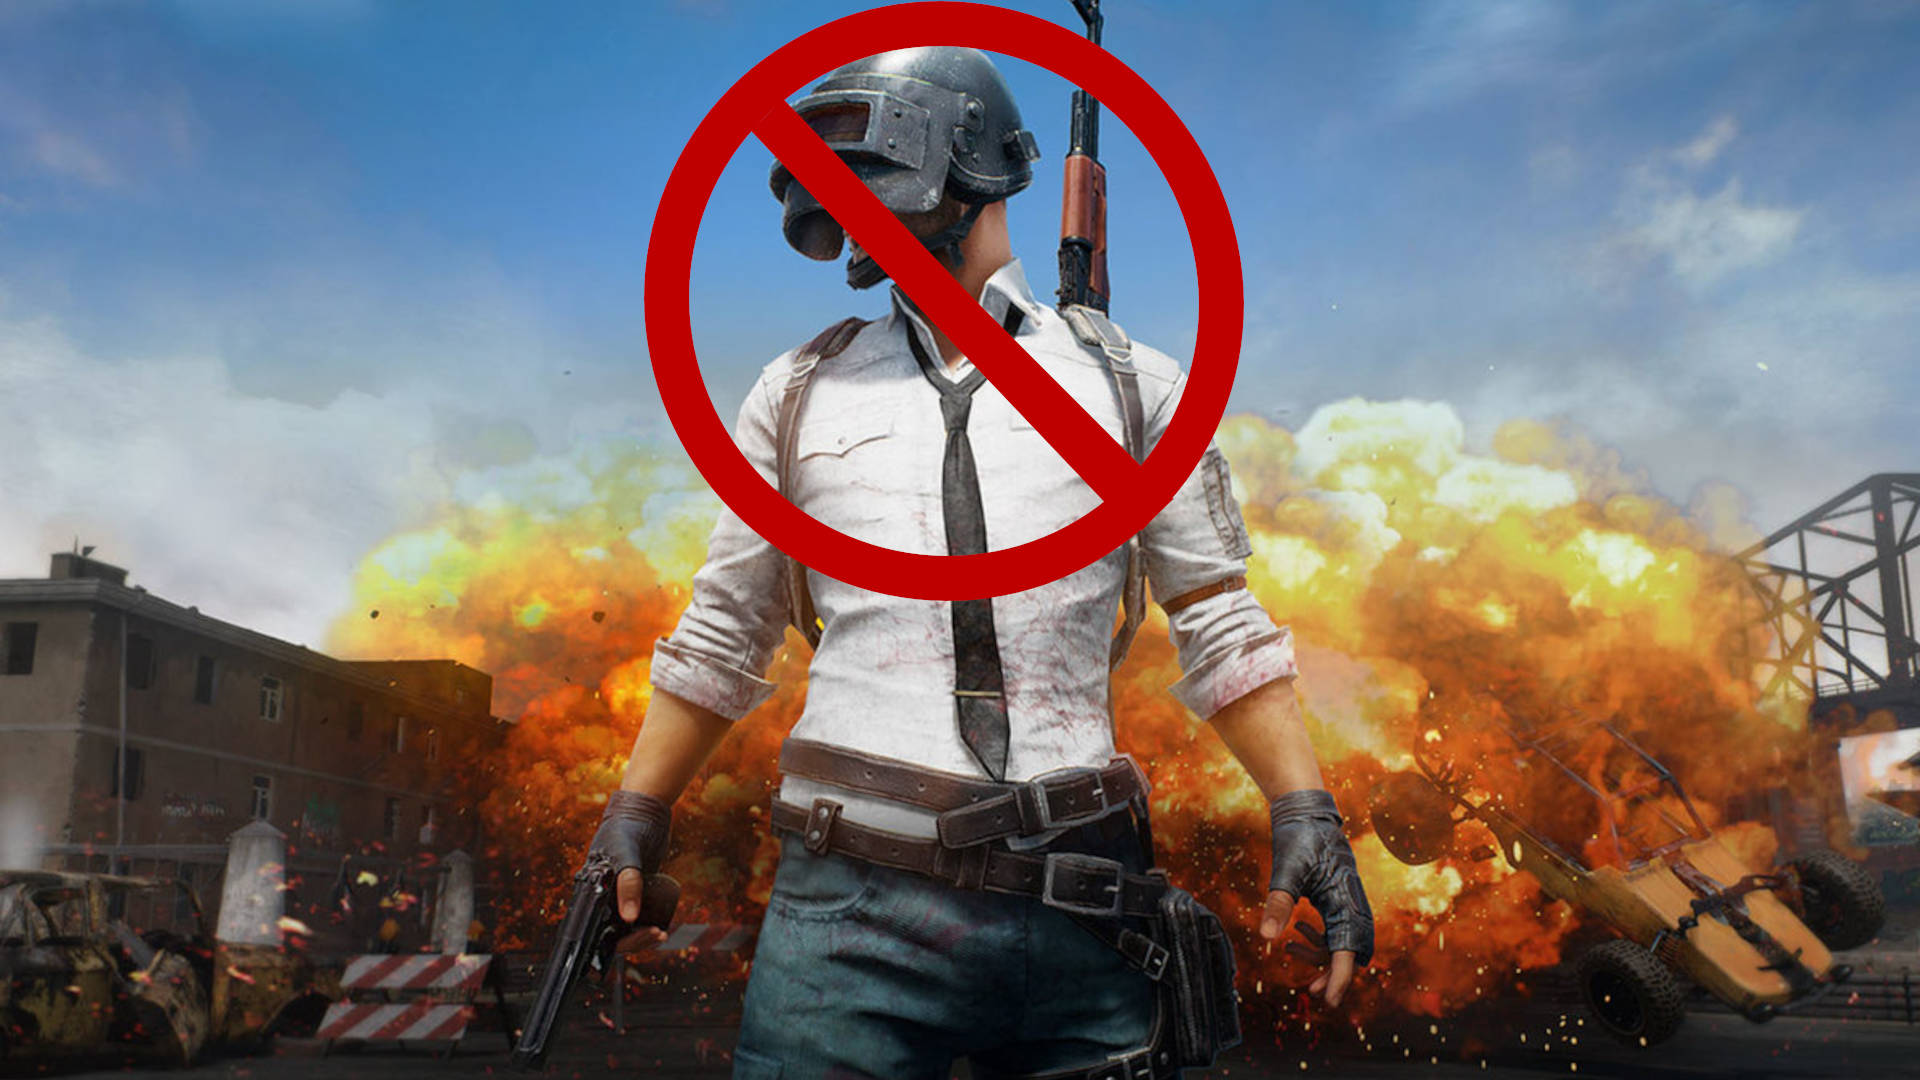 India bans PUBG Mobile and 117 other mobile apps